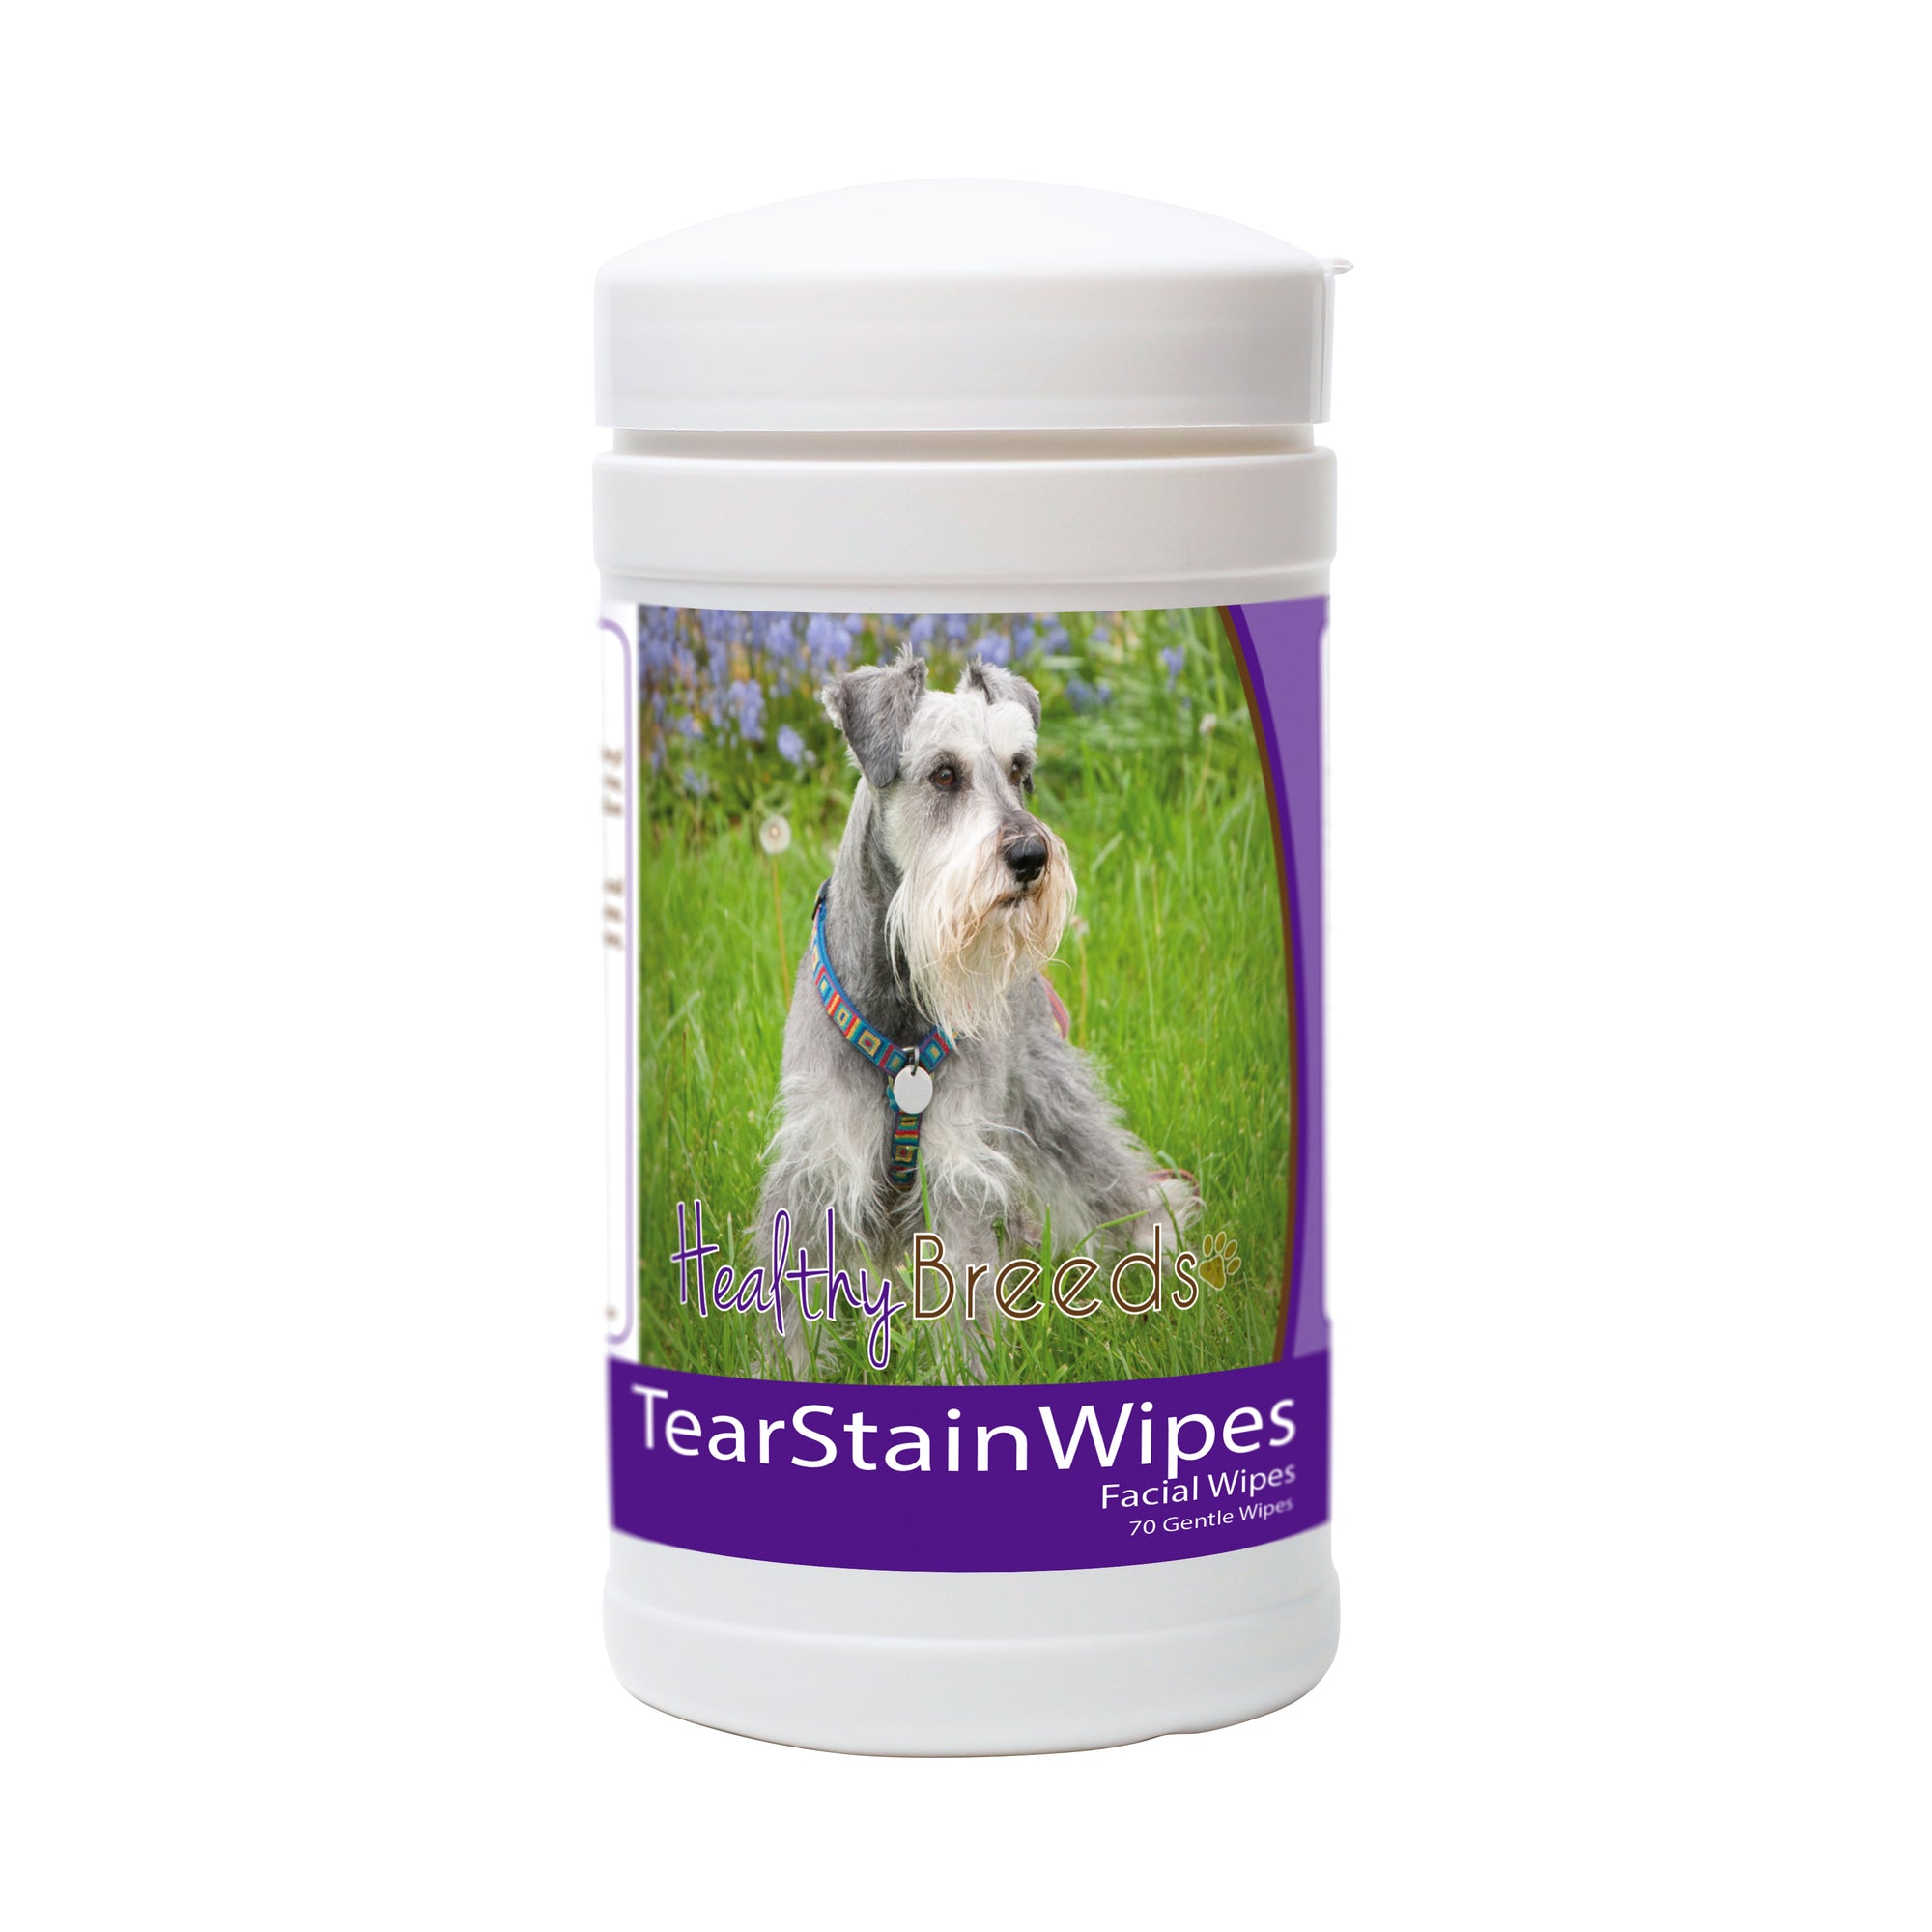 Healthy Breeds Miniature Schnauzer Tear Stain Wipes 70 Count